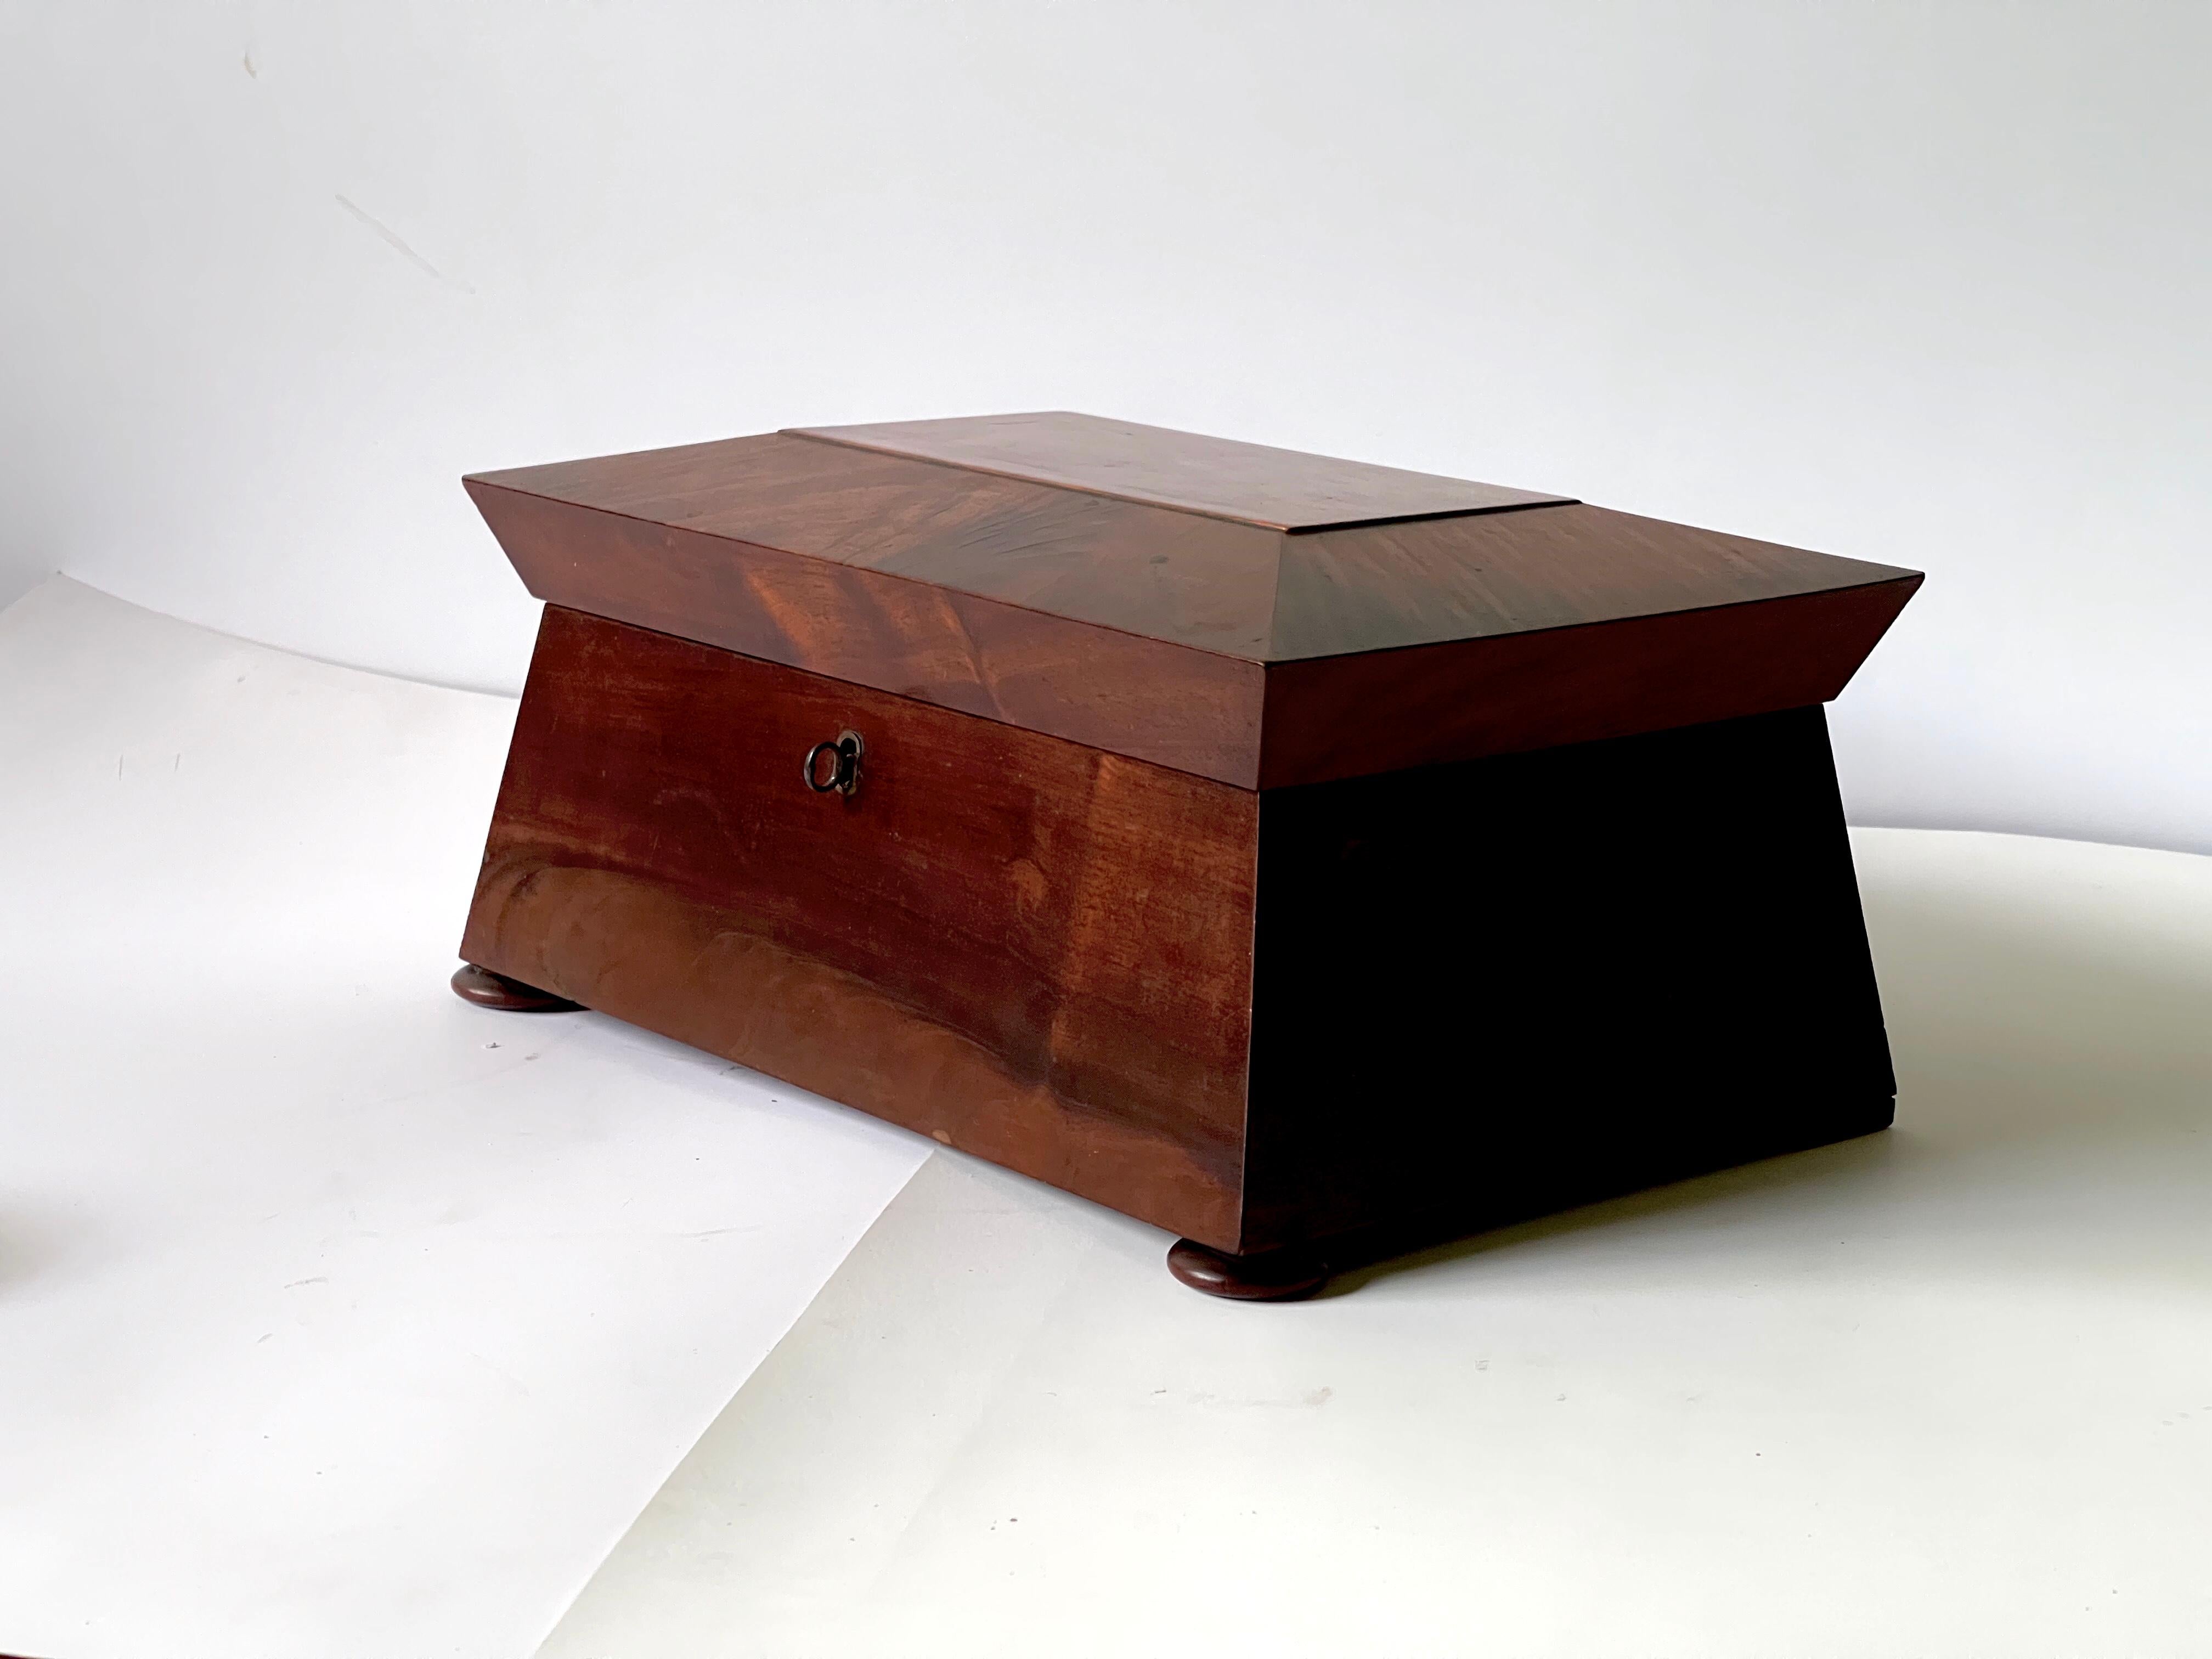 19th century English William IV sewing box of a sarcophagus form with a domed lid and raised on front bun feet. The hinged top opens to reveal bright magenta accents on its interior. The removable tray is fitted with lidded and open compartments and